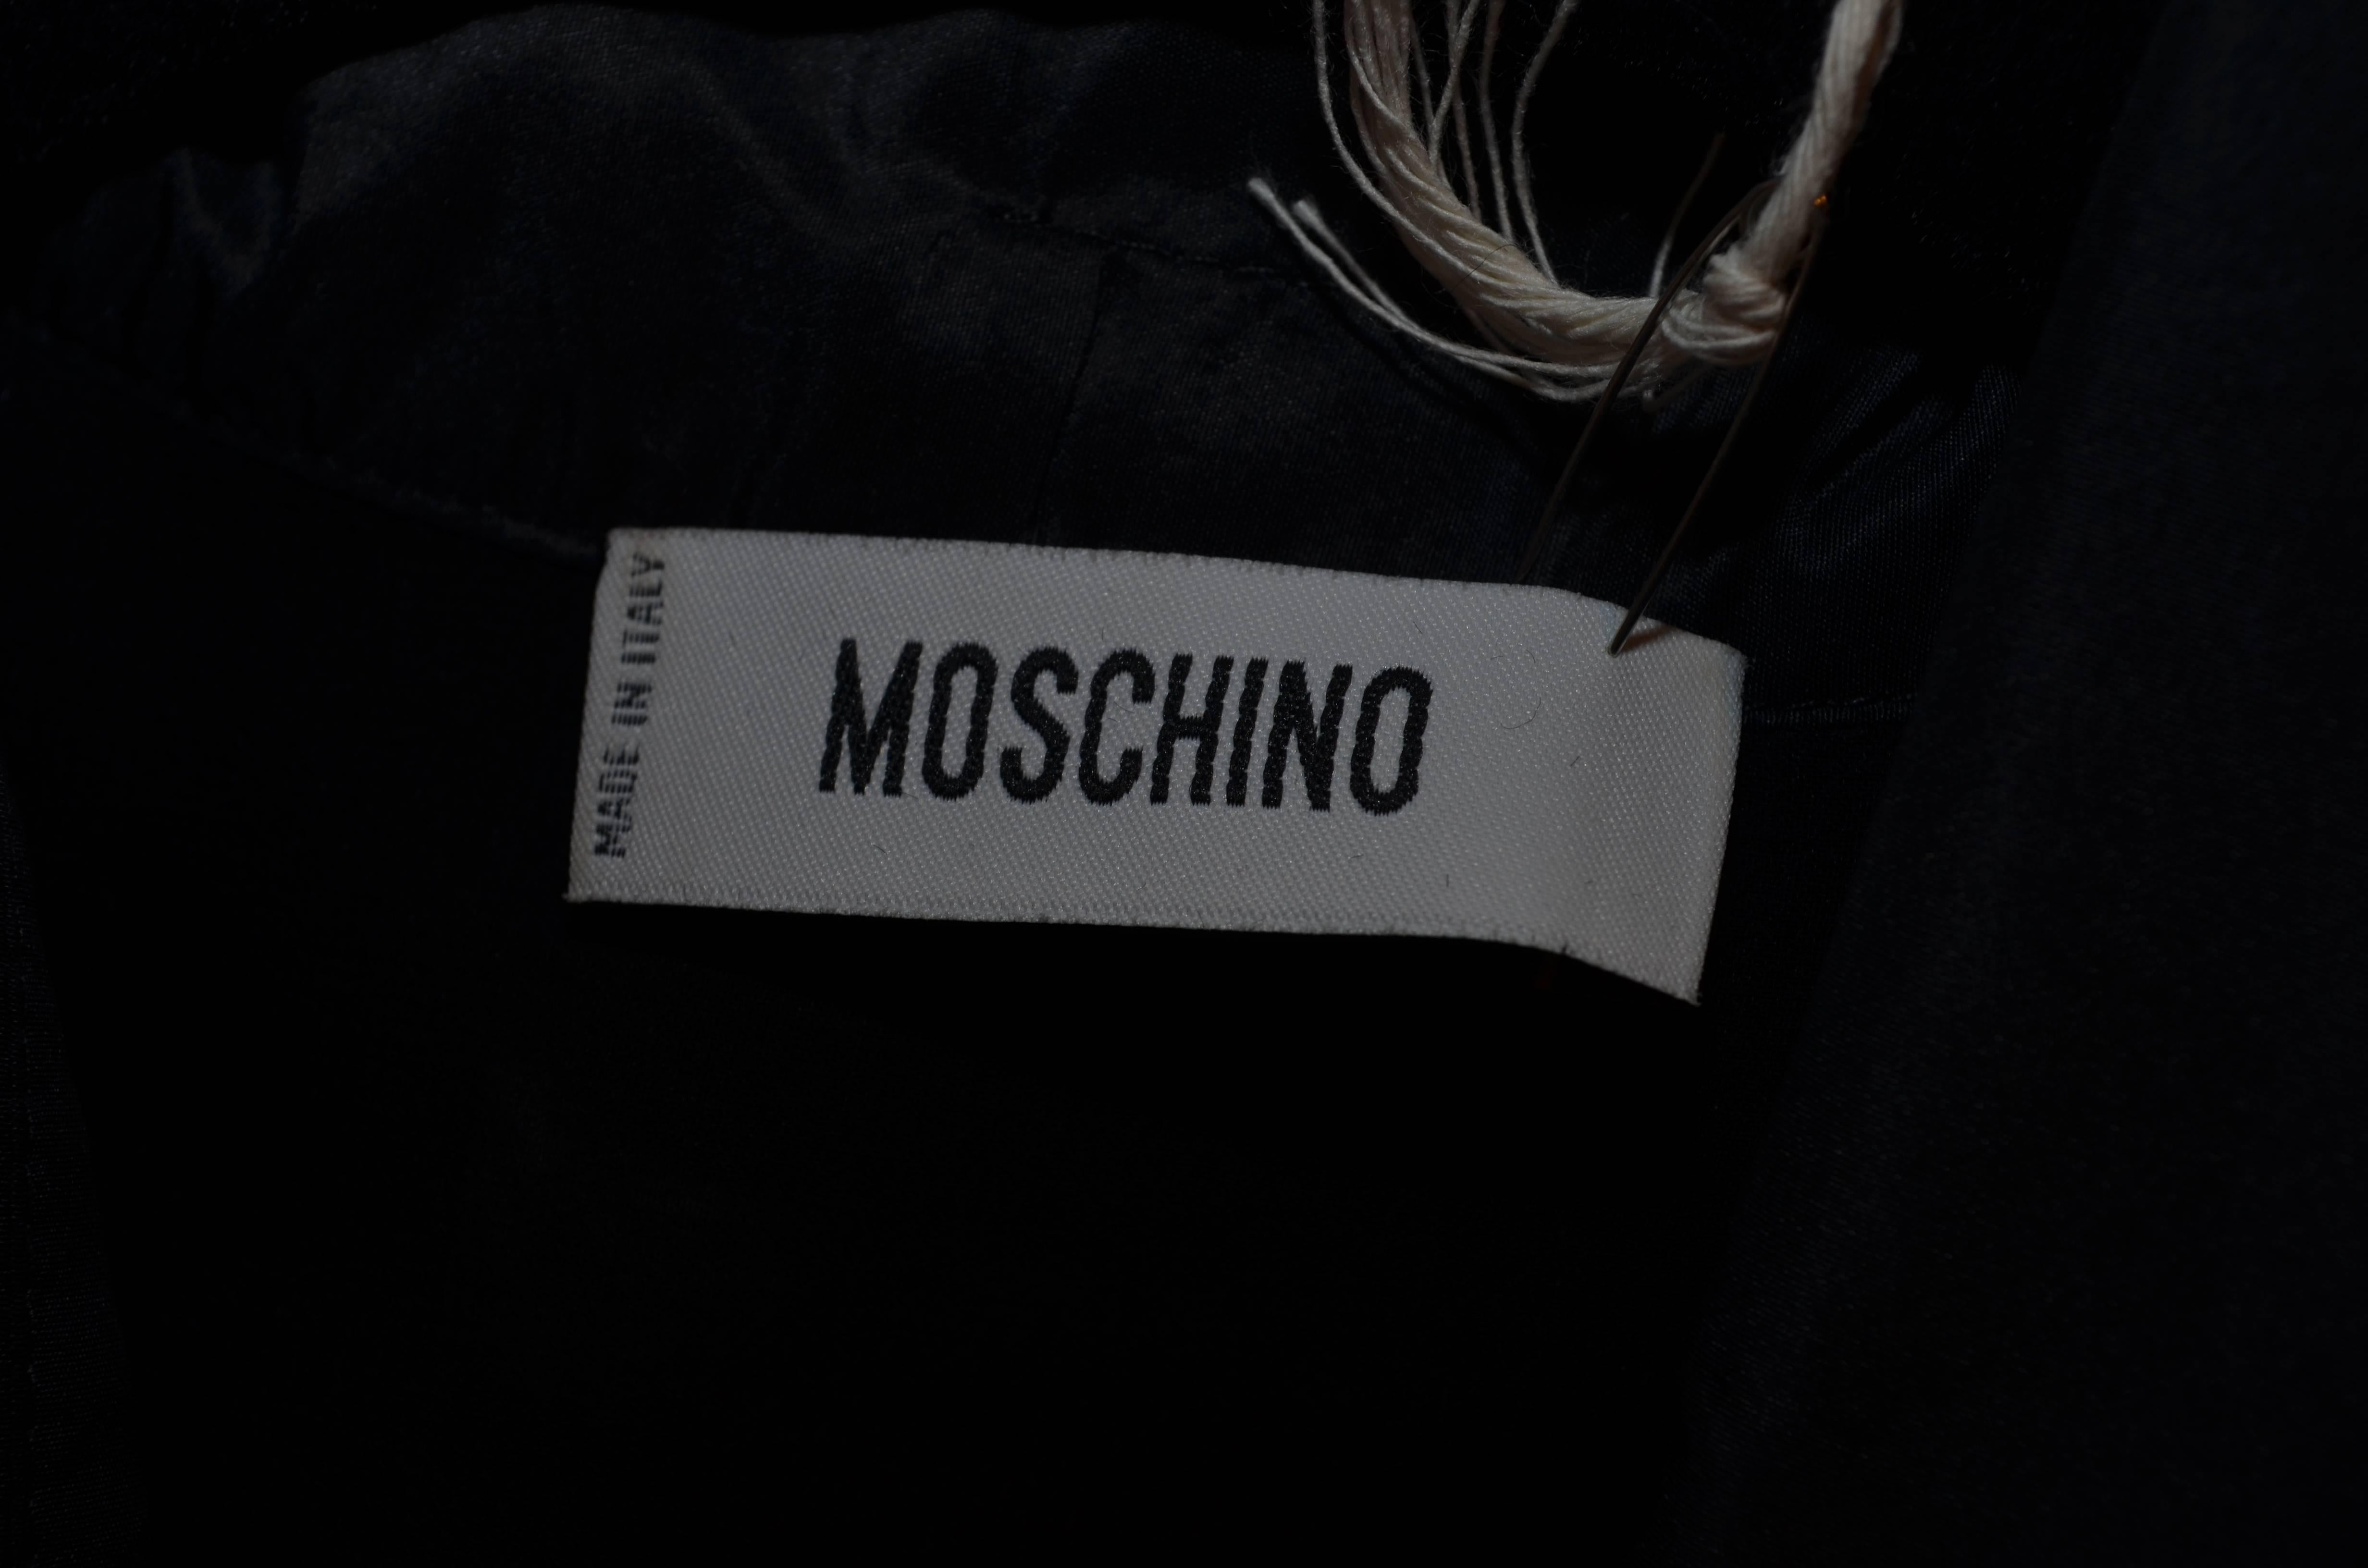 Men's Moschino Silk Chiffon Blouse with Sleeves That Tie at the Waist